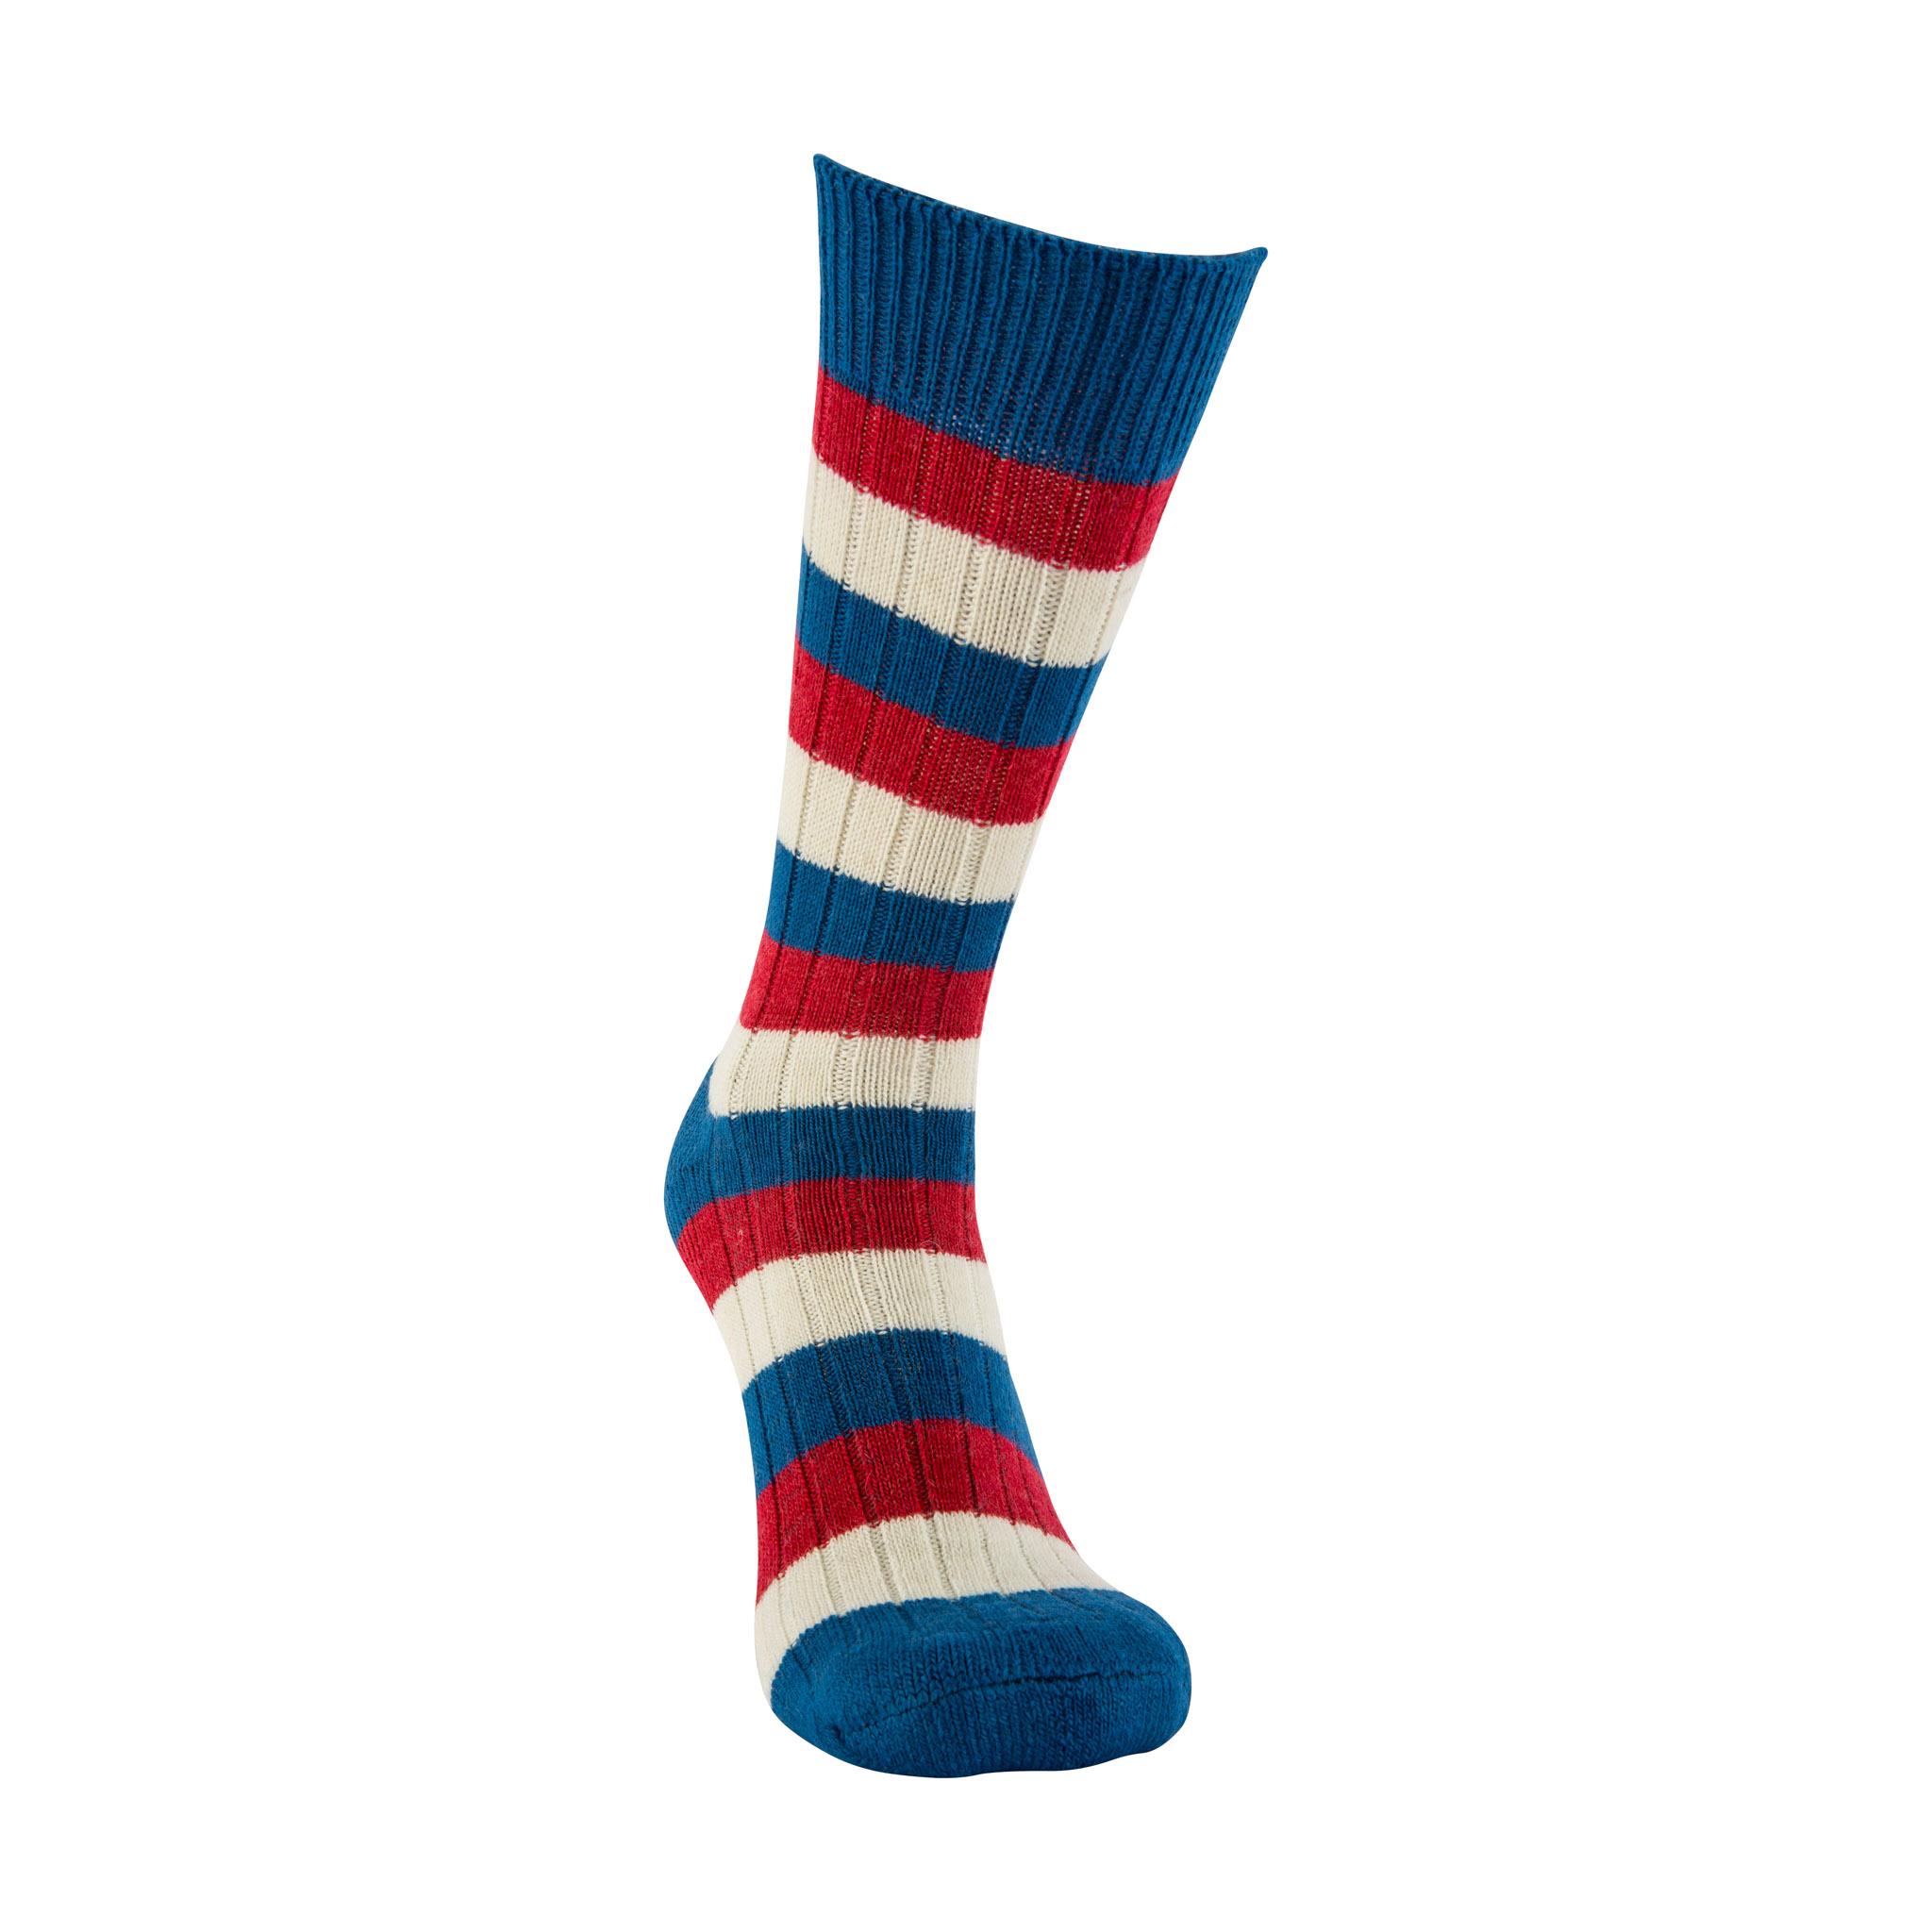 Lausanne 1871 Heritage Merino Sock, Red And White Striped Rugby Socks